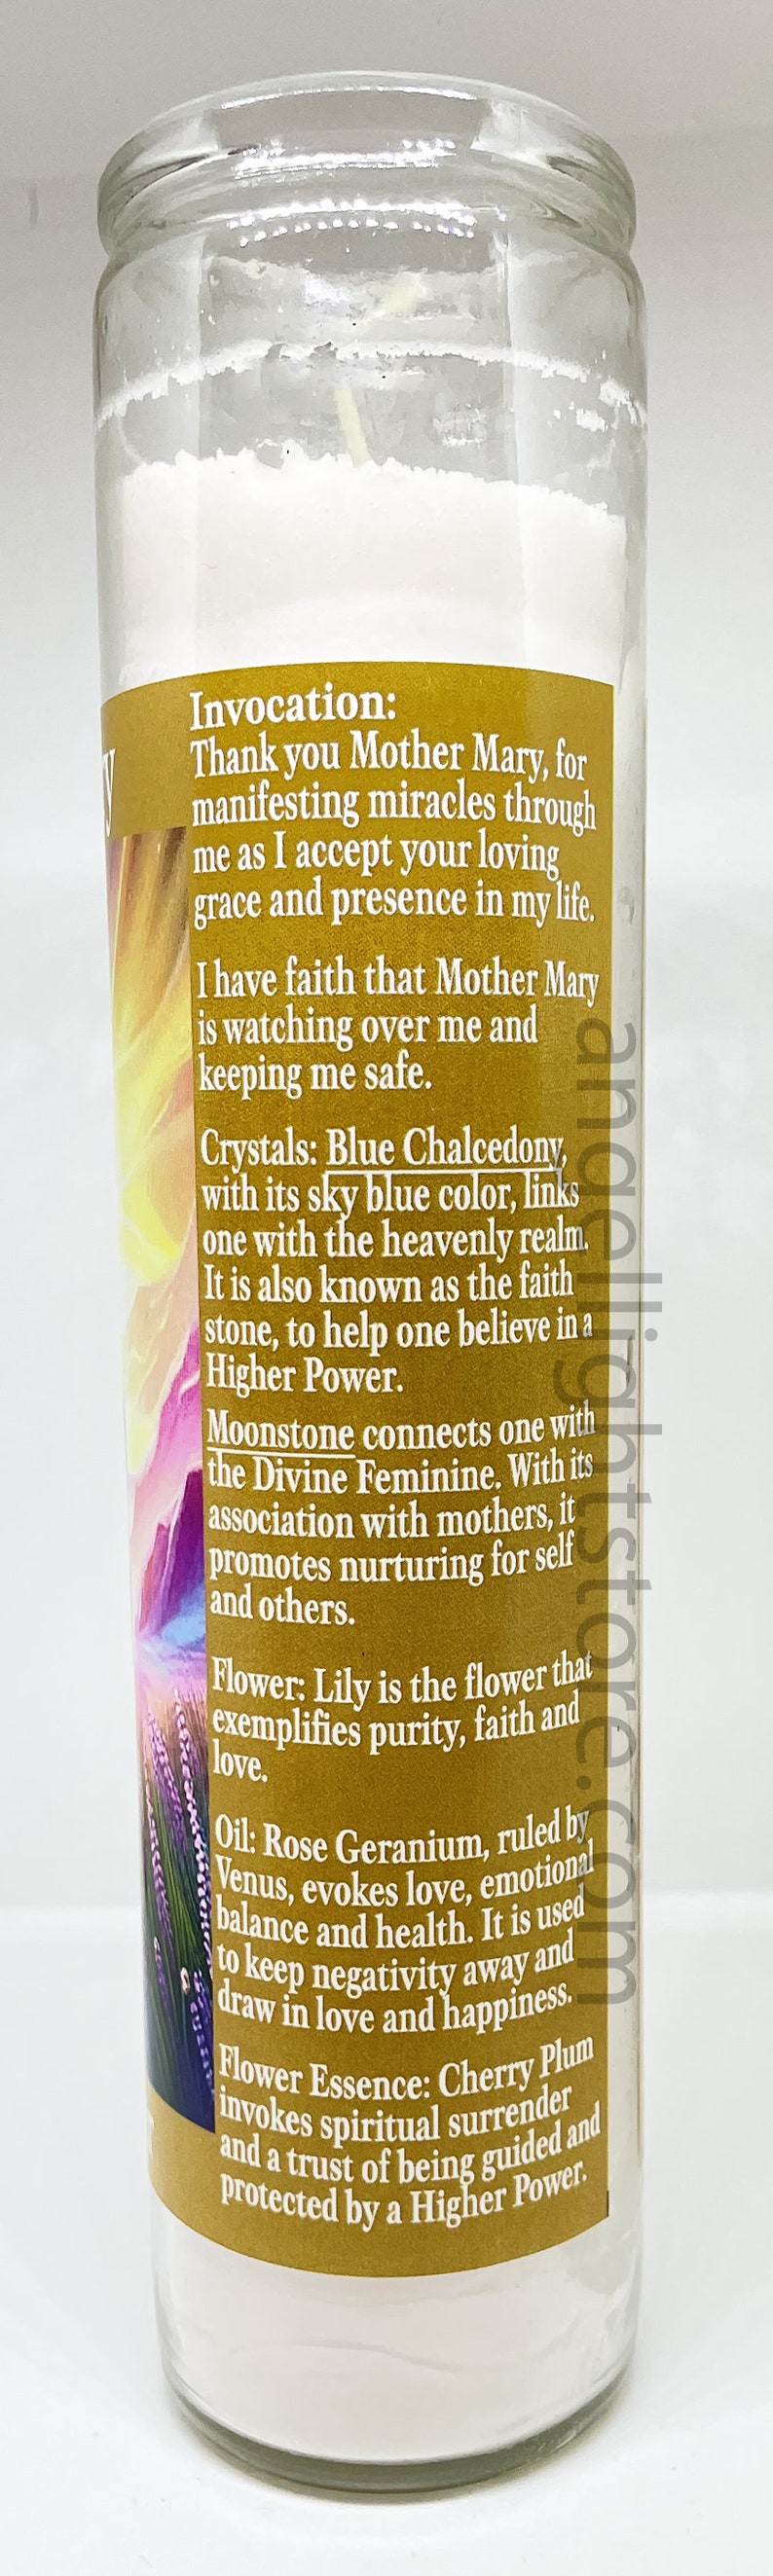 Mother Mary Candle spiritual deities christian religious goddess virgin Mary holy mother of god catholic gift church bible image 4